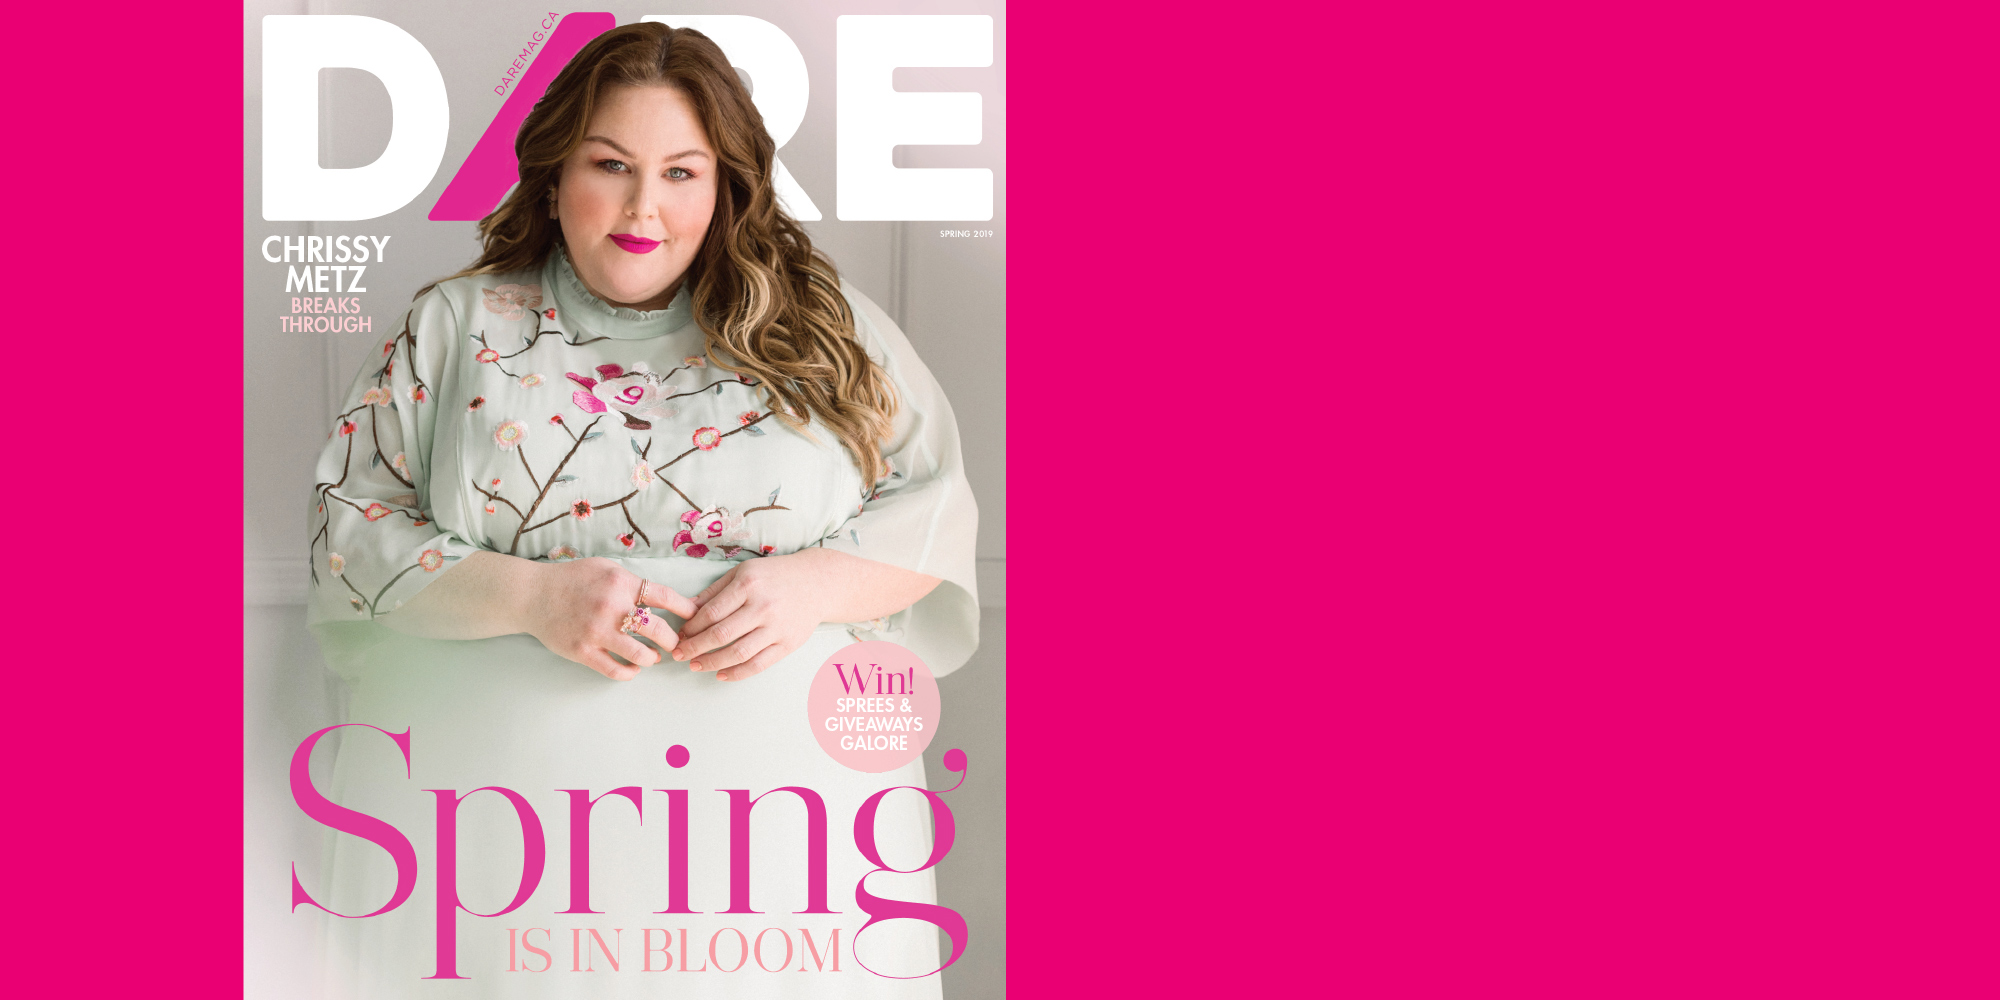 DARE Magazine Spring Issue with Chrissy Metz